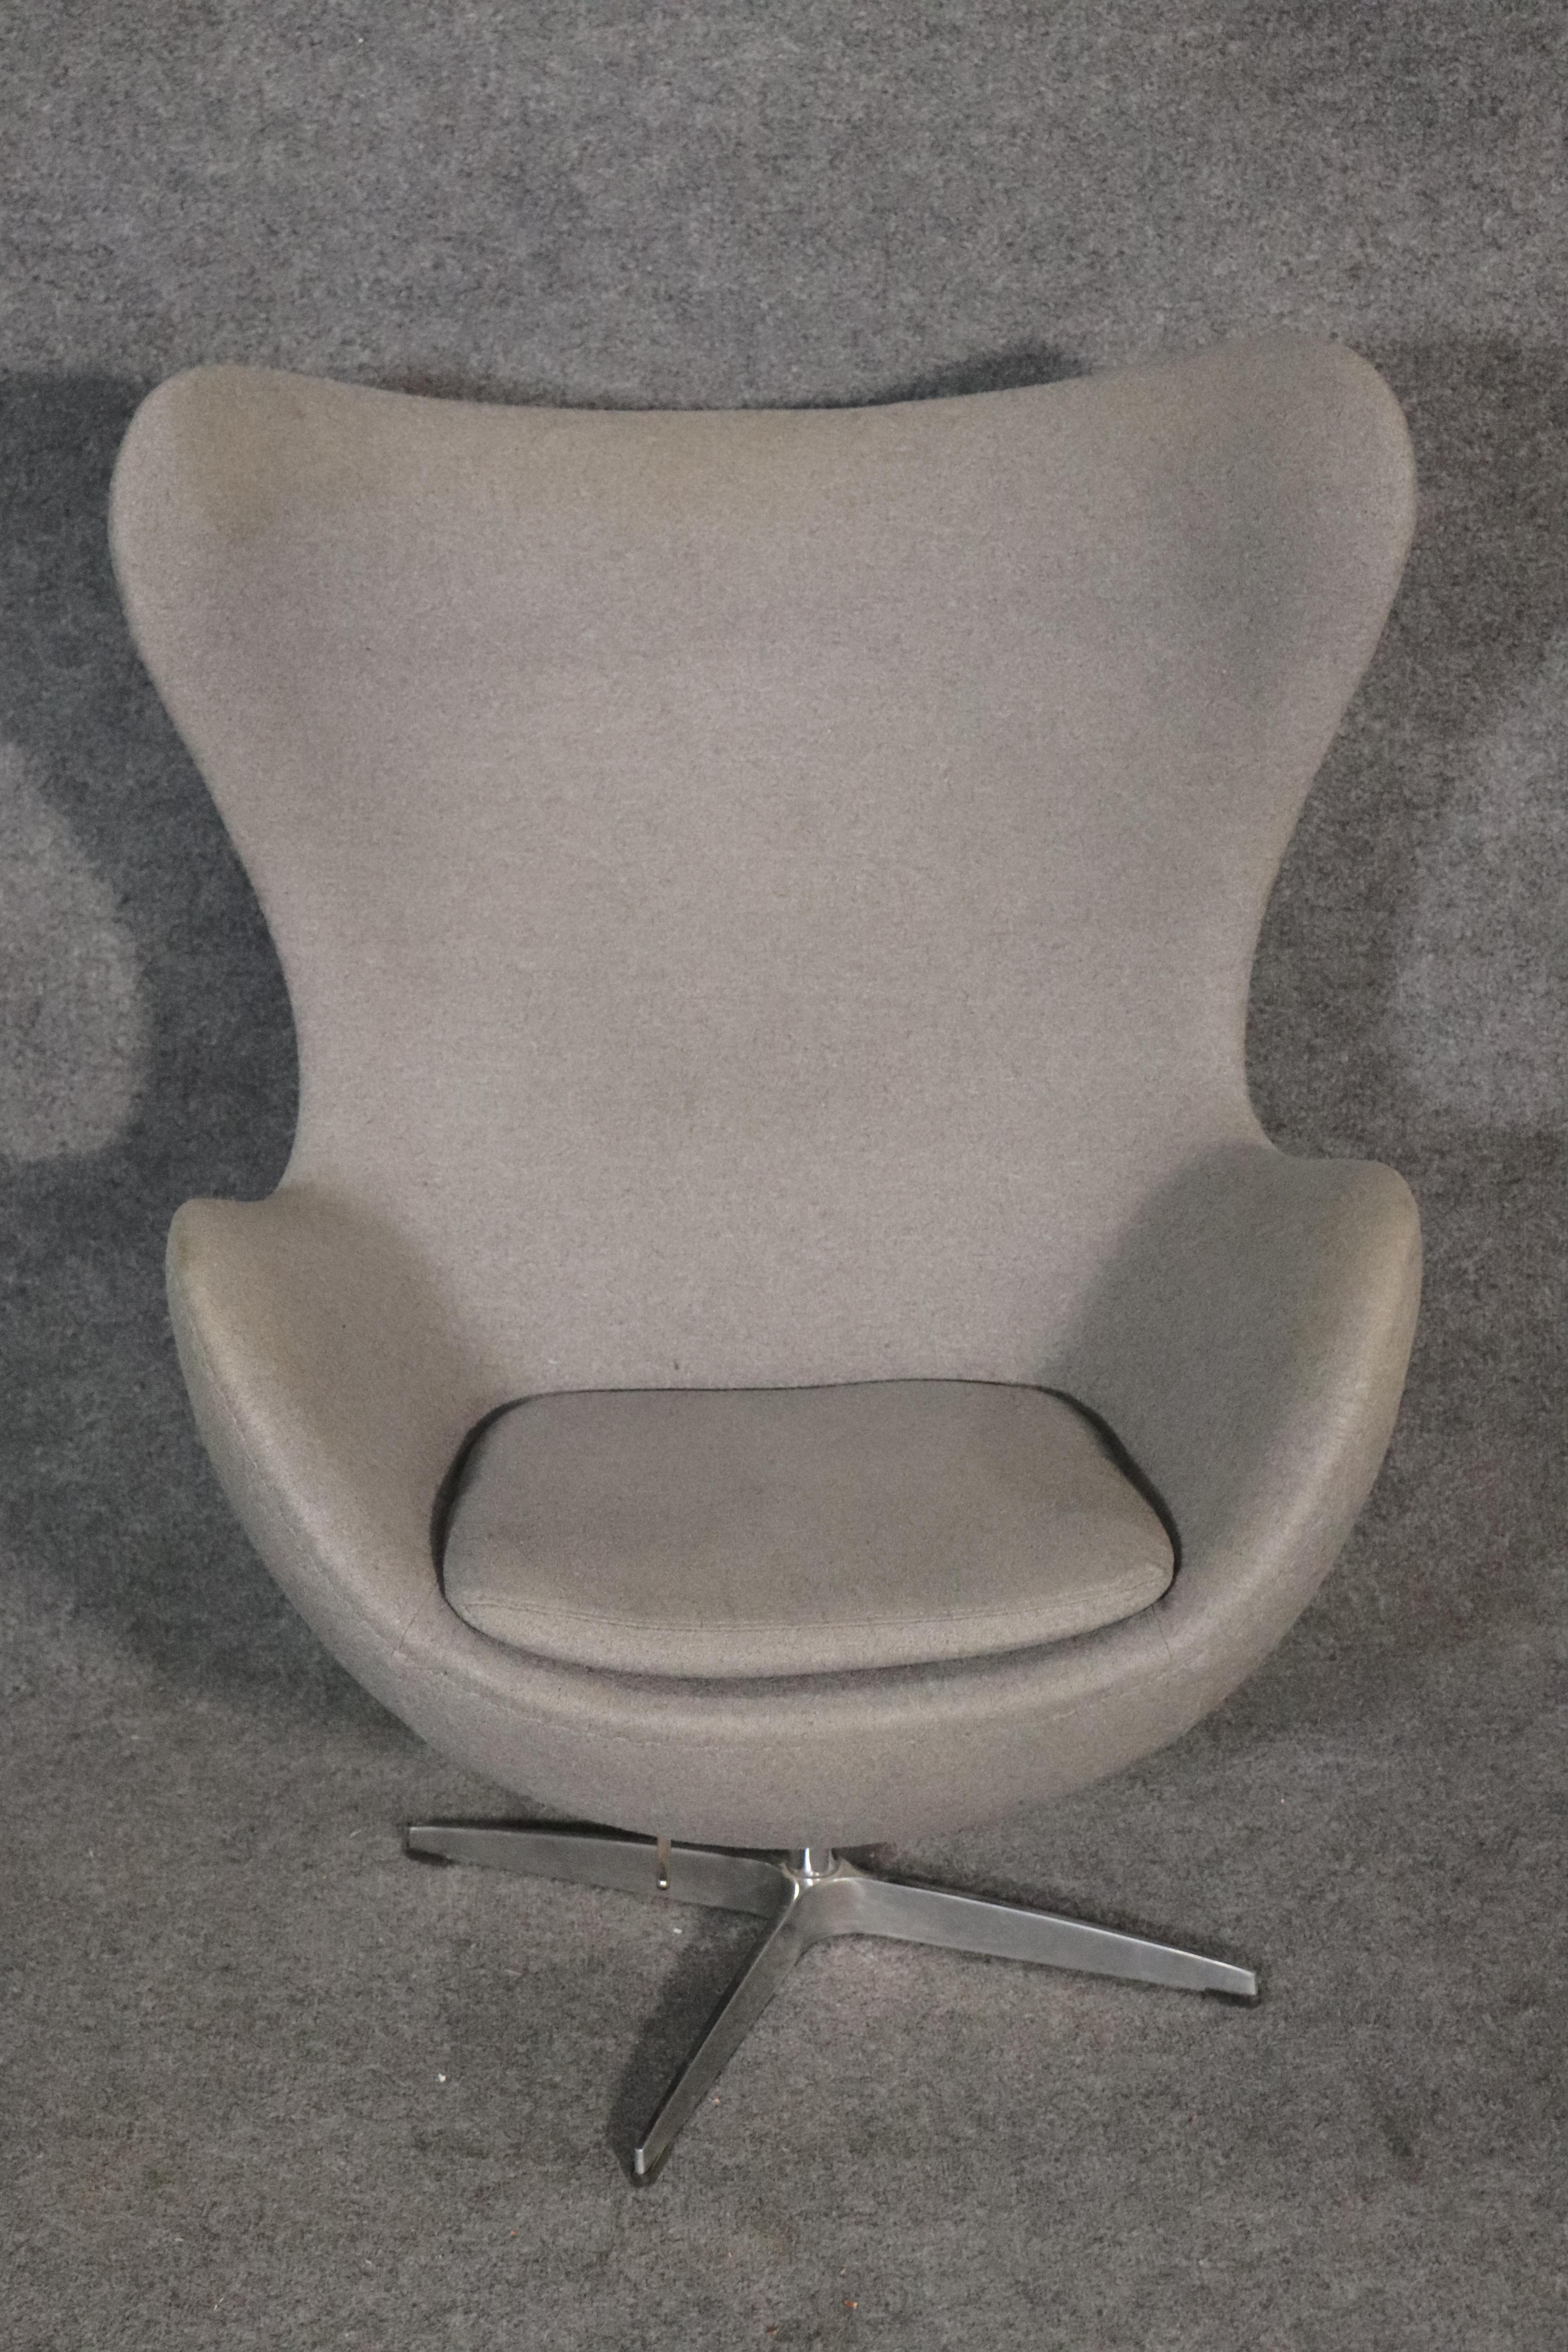 Classic Mid-Century Modern Egg chair, designed by Fritz Hansen. Great modern design with grey upholstery and polished chrome base.
Please confirm location NY or NJ.